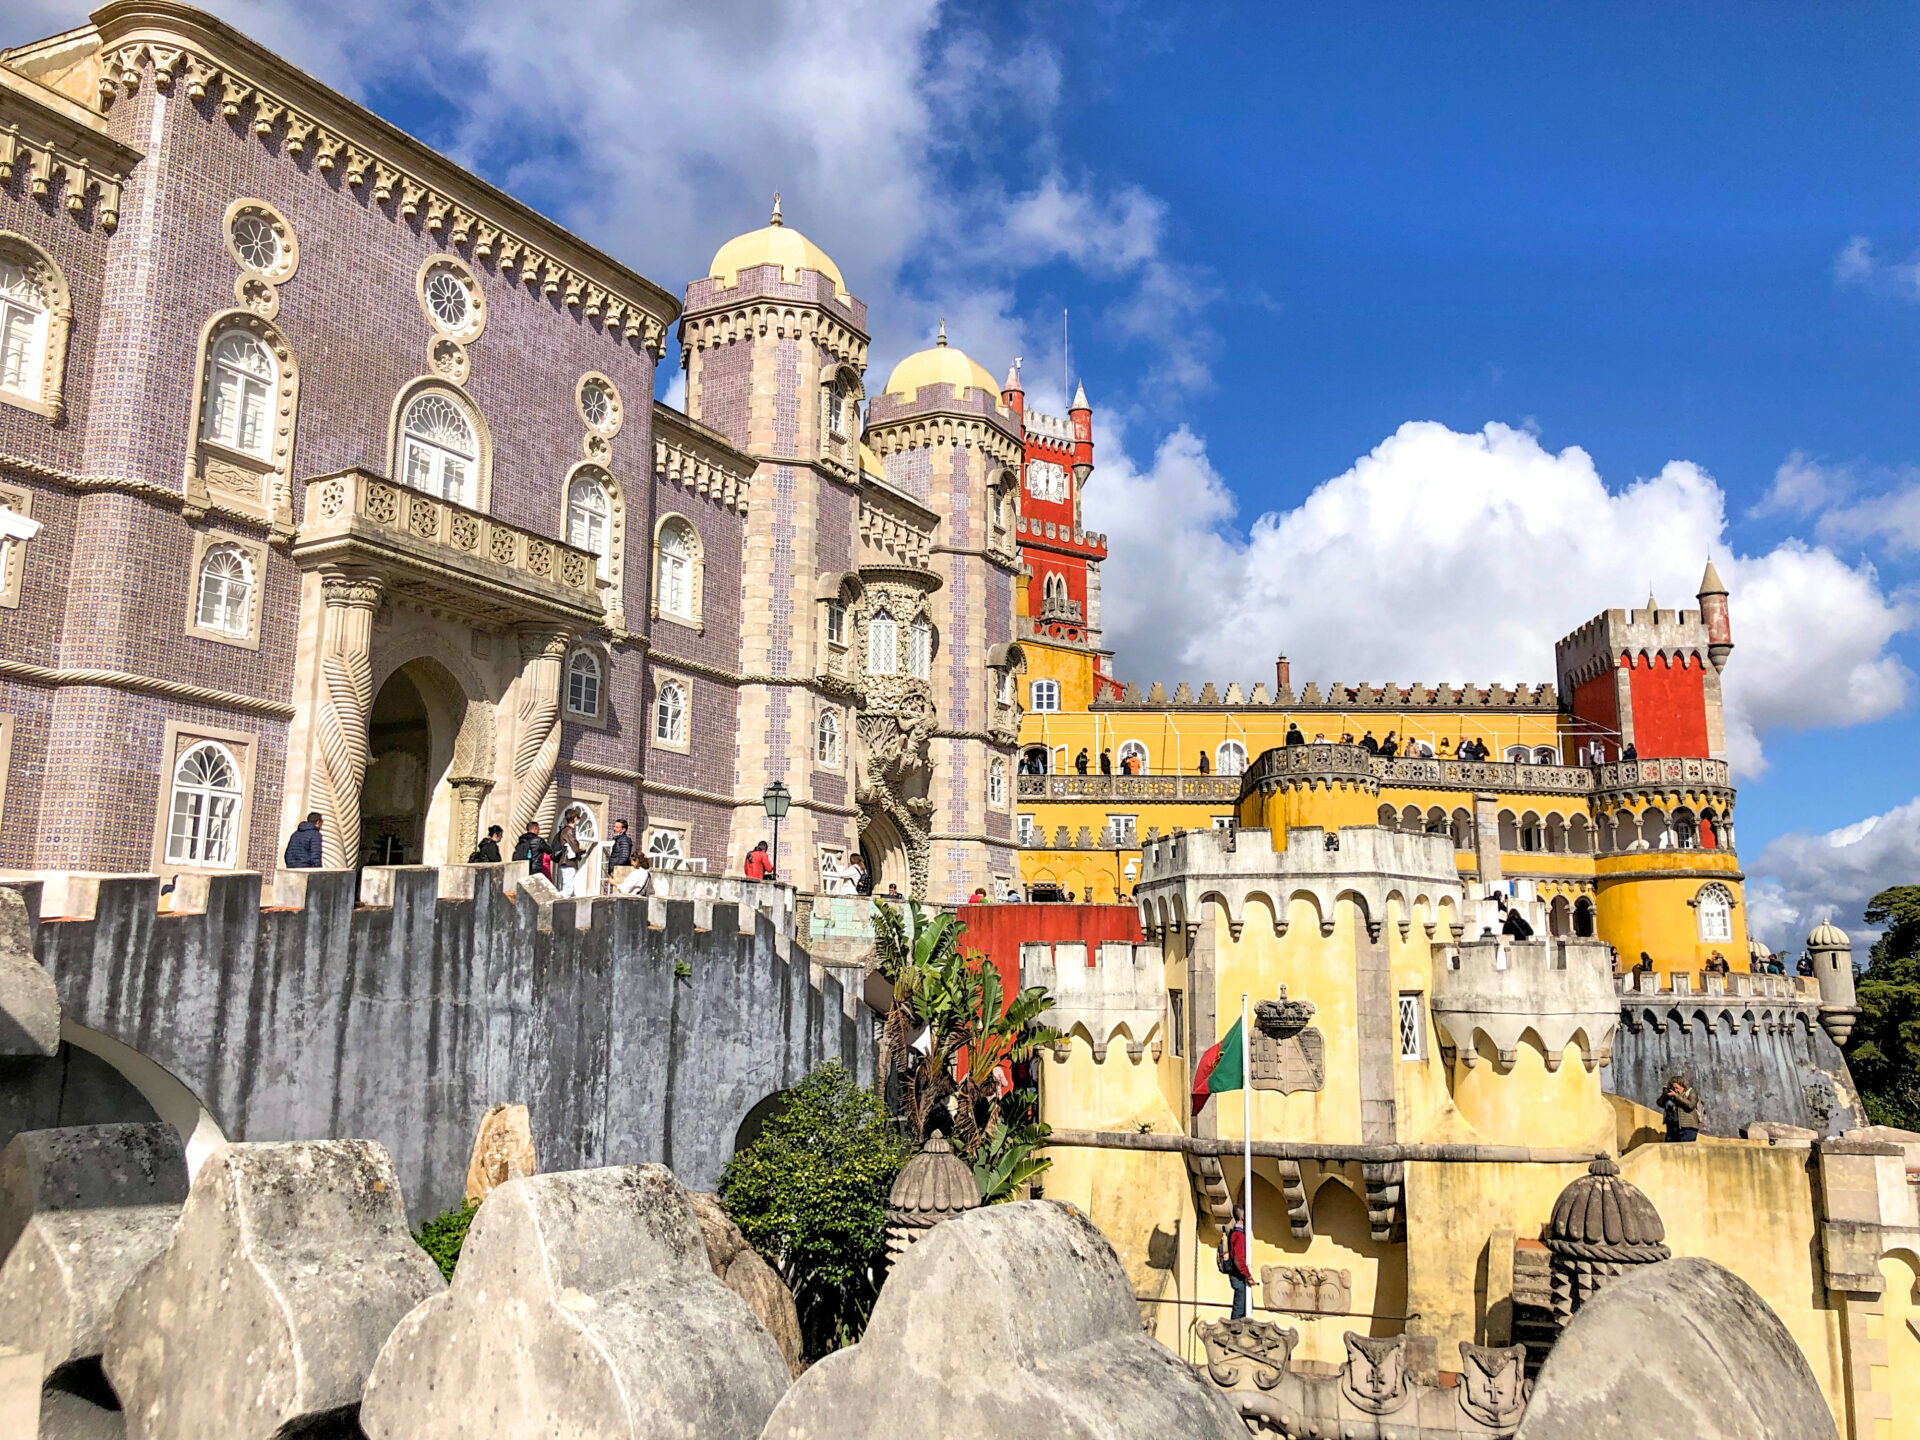 Visiting Pena Palace in Sintra